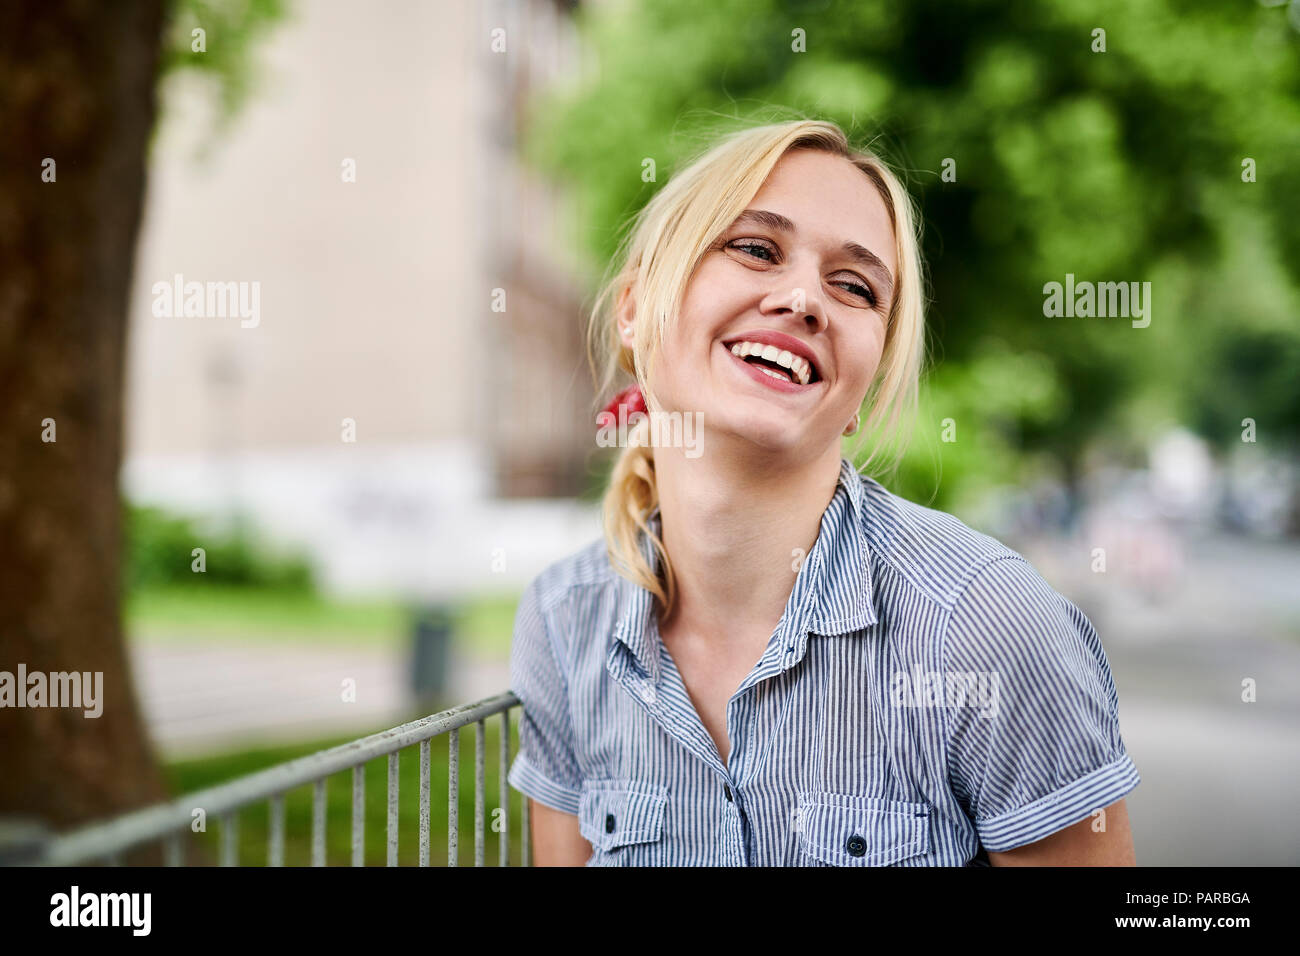 Laughing blond young woman at a fence Stock Photo